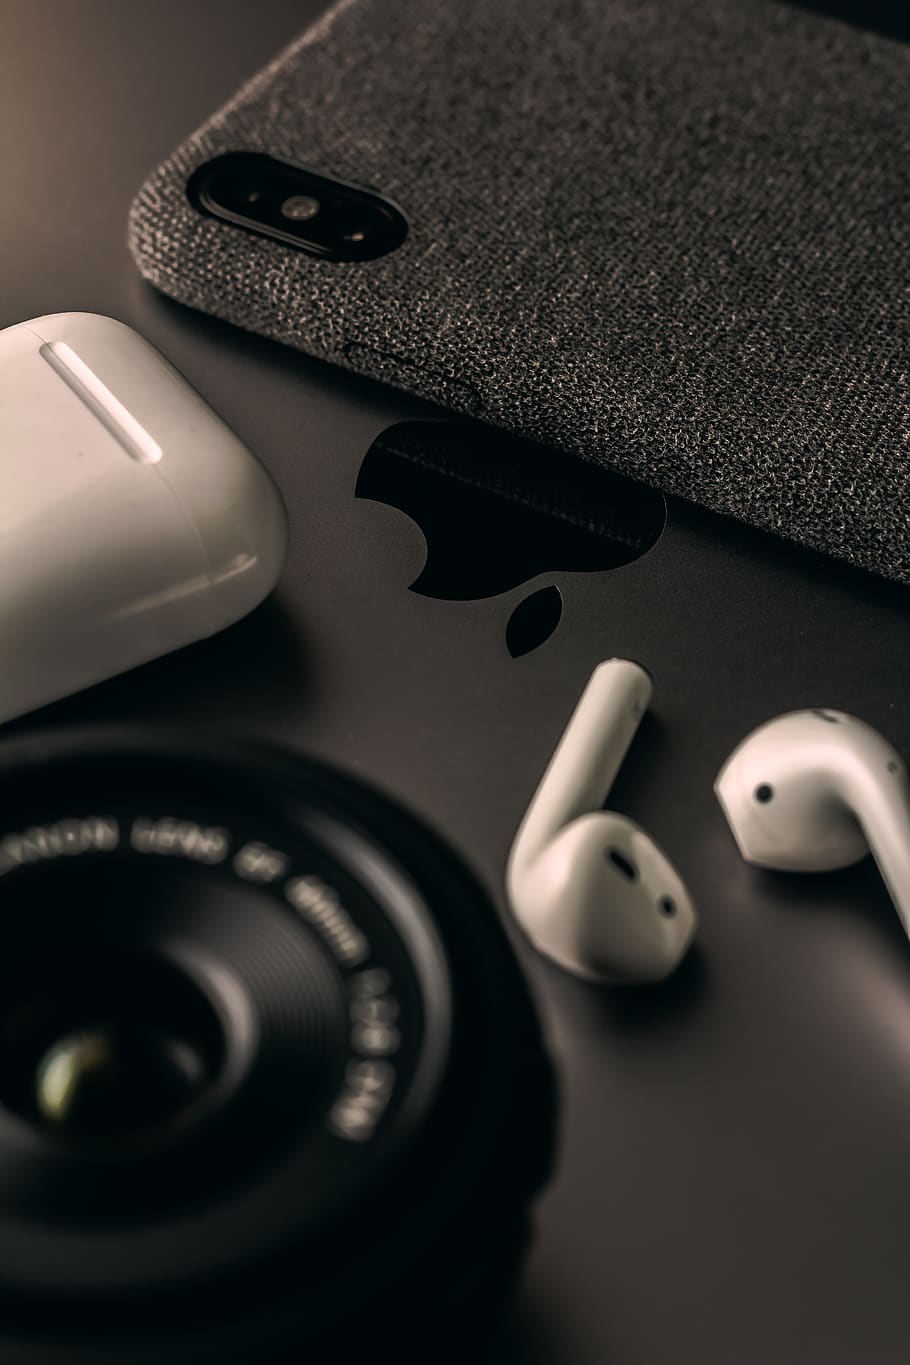 HD wallpaper: space gray iPhone X beside AirPods, technology, close-up,  indoors | Wallpaper Flare